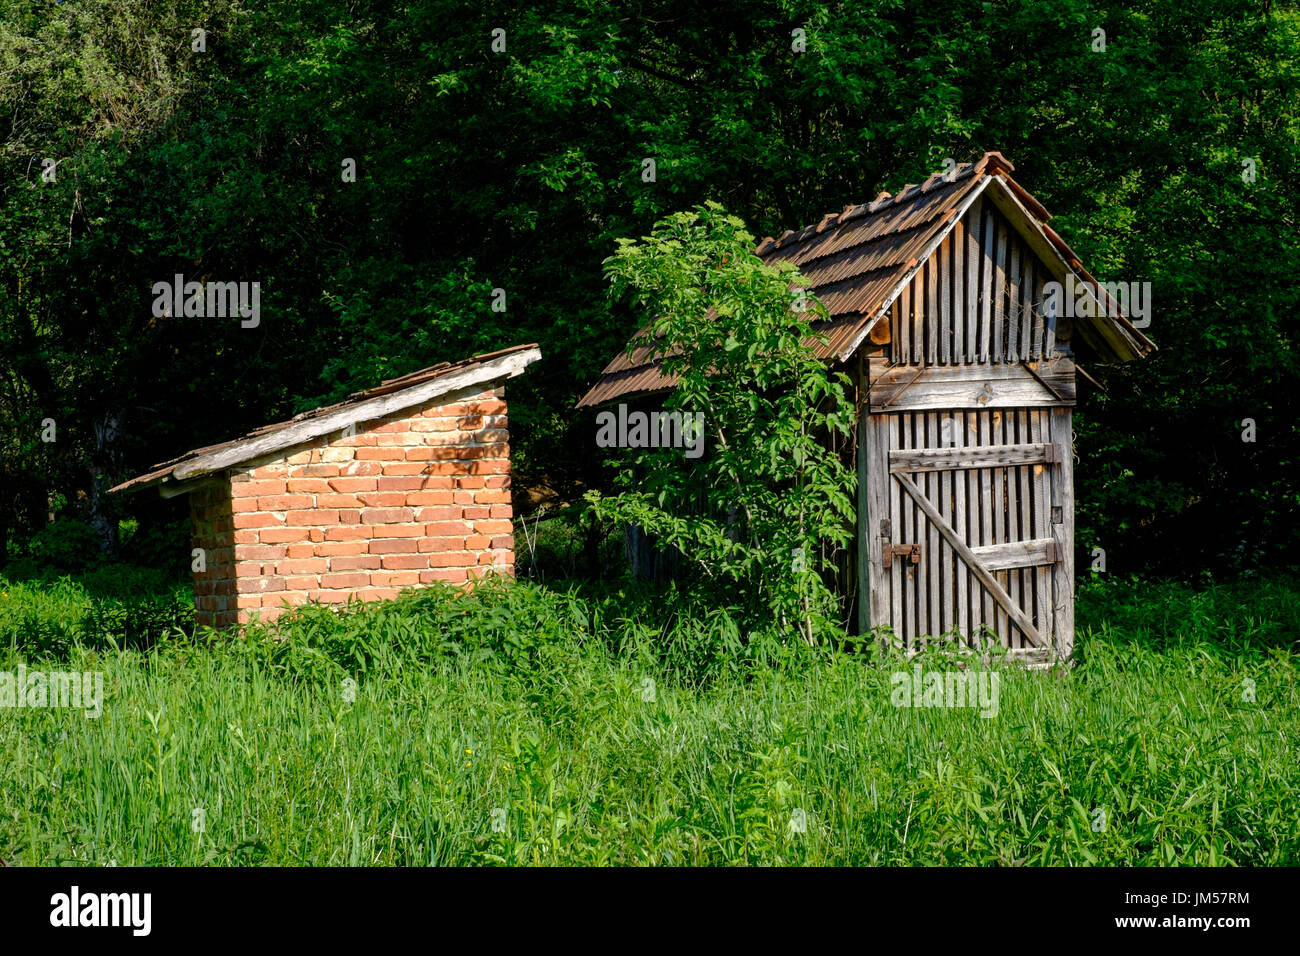 outside toilet and drying shed outbuildings in the garden of a typical rural village house in zala county hungary Stock Photo